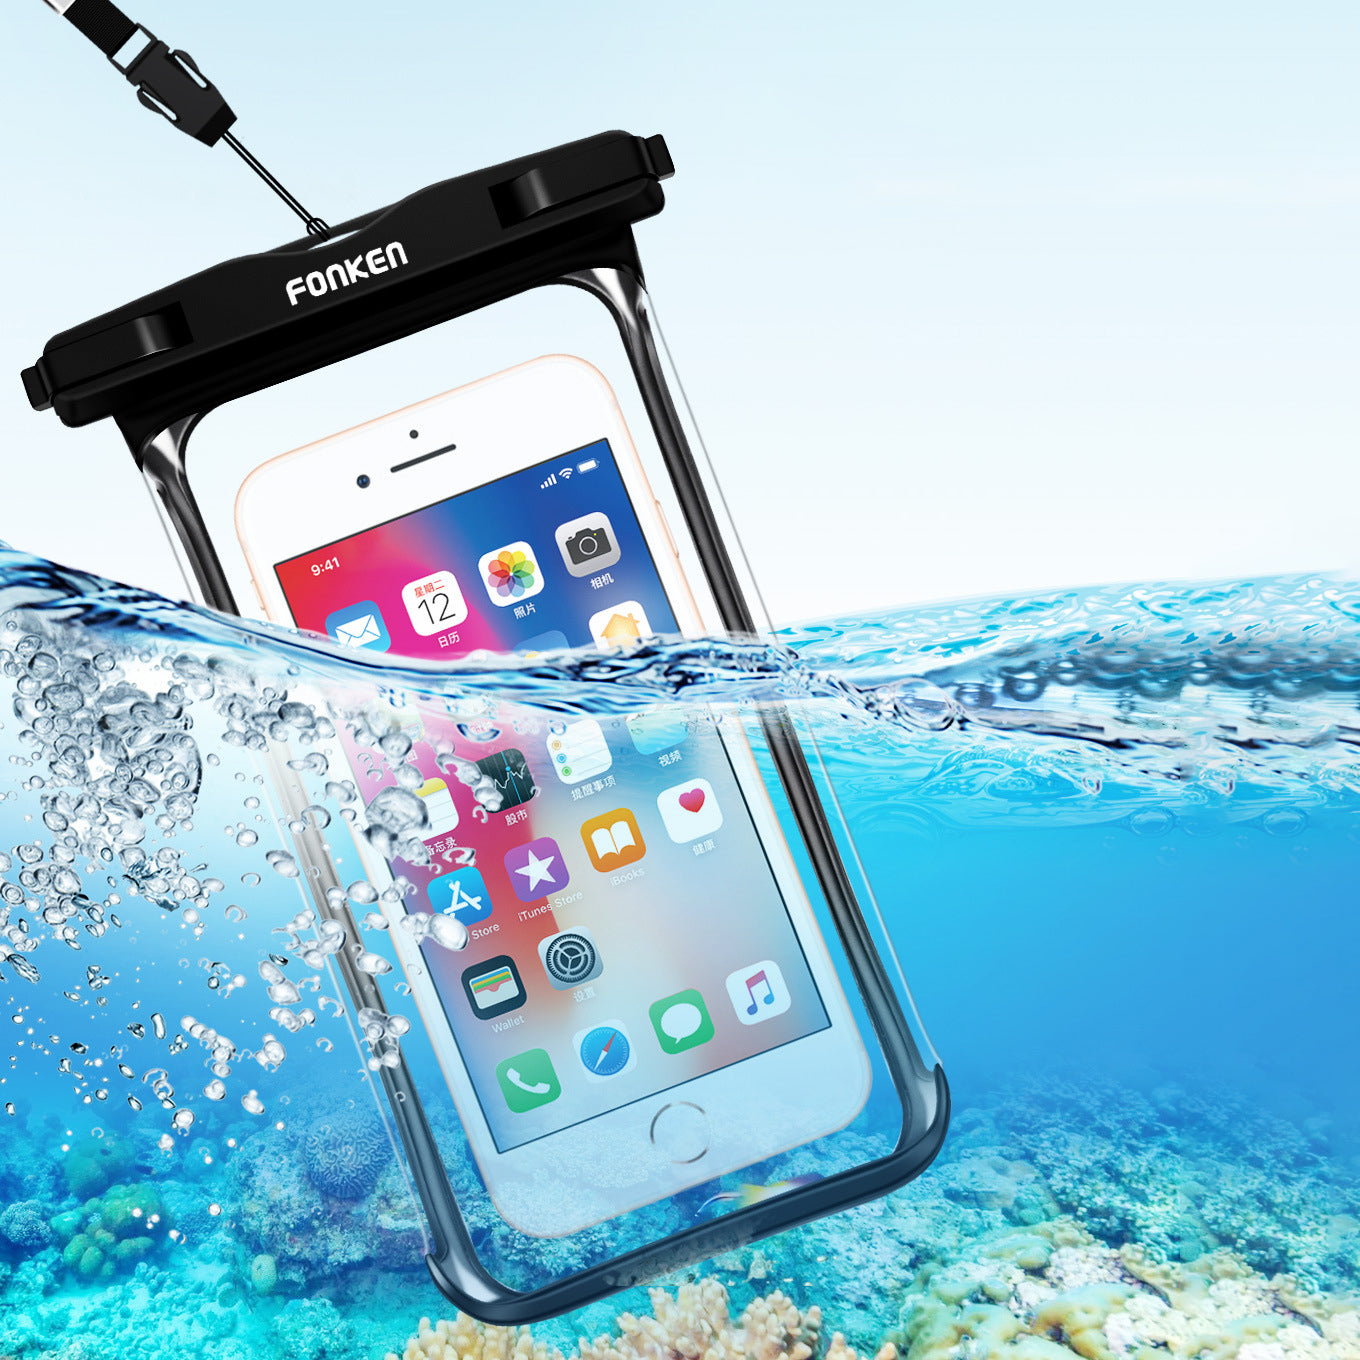 Panoramic Mobile Phone Waterproof Bag Outdoor Sports Swimming Rainproof Touch Screen Photo 6 Inches